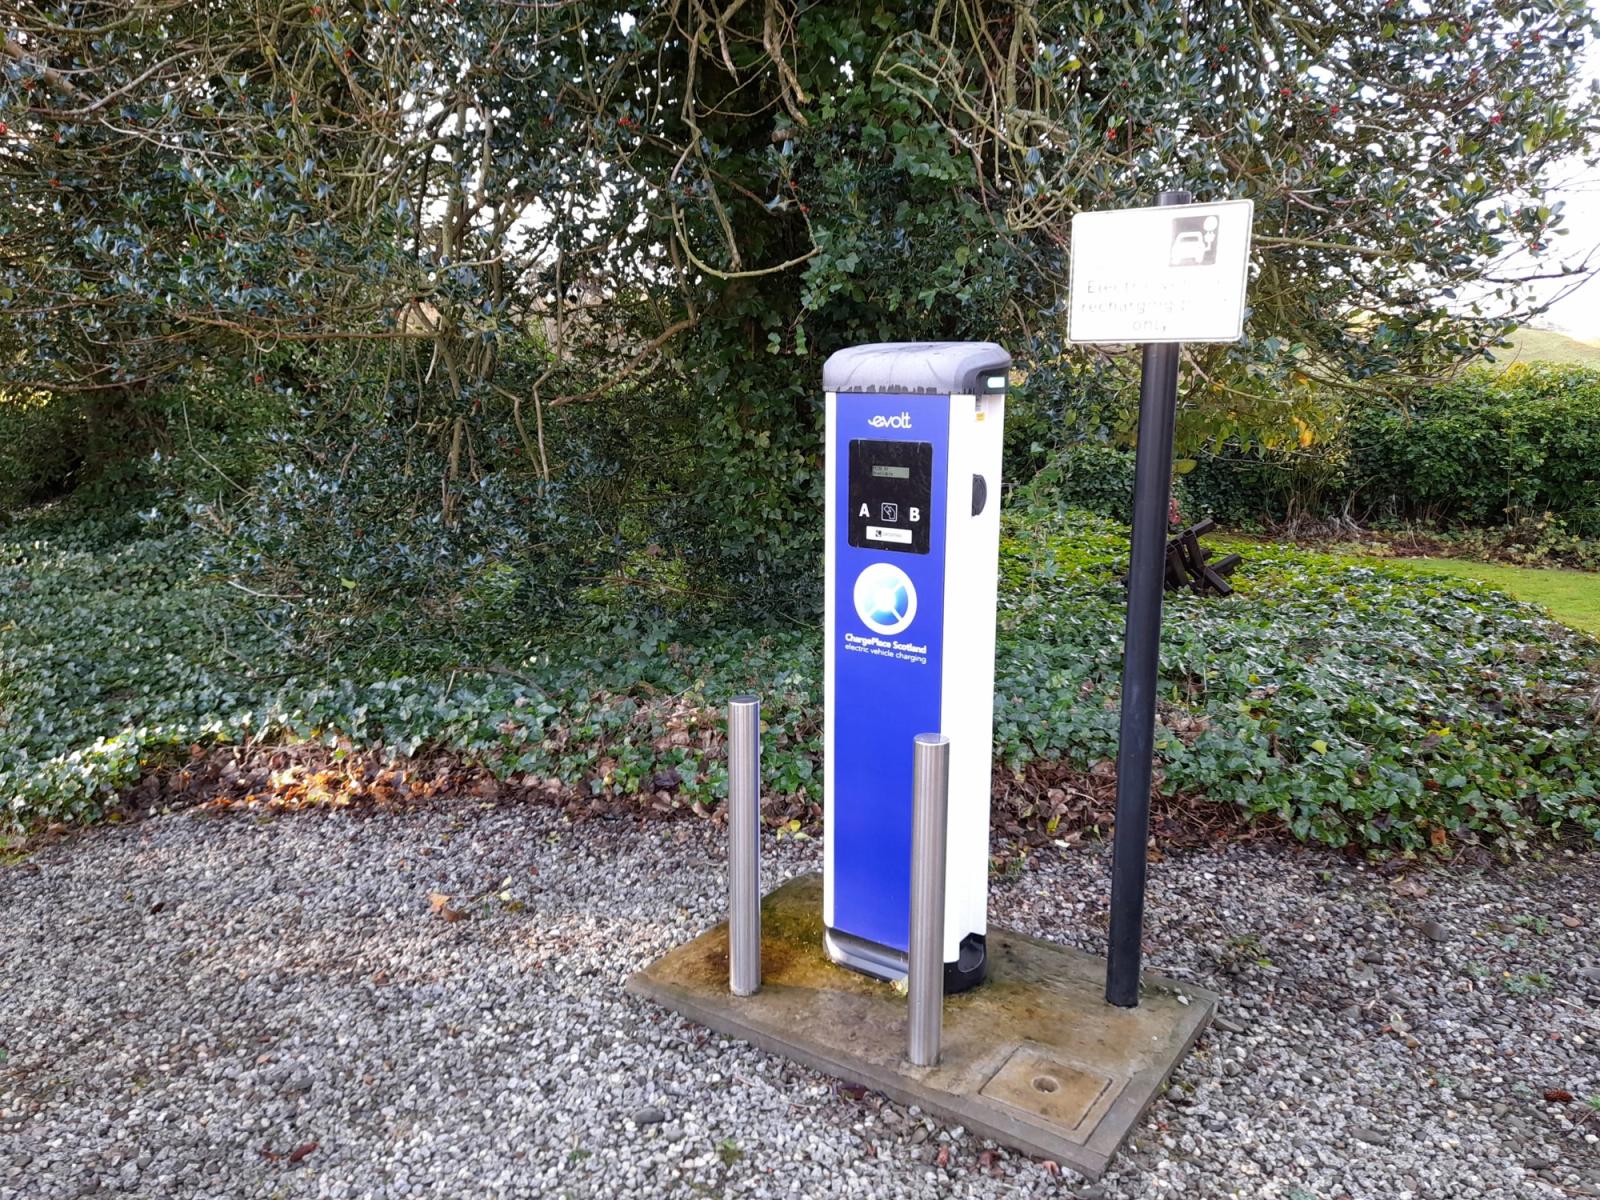 Hotels with electric car charging points in Scotland